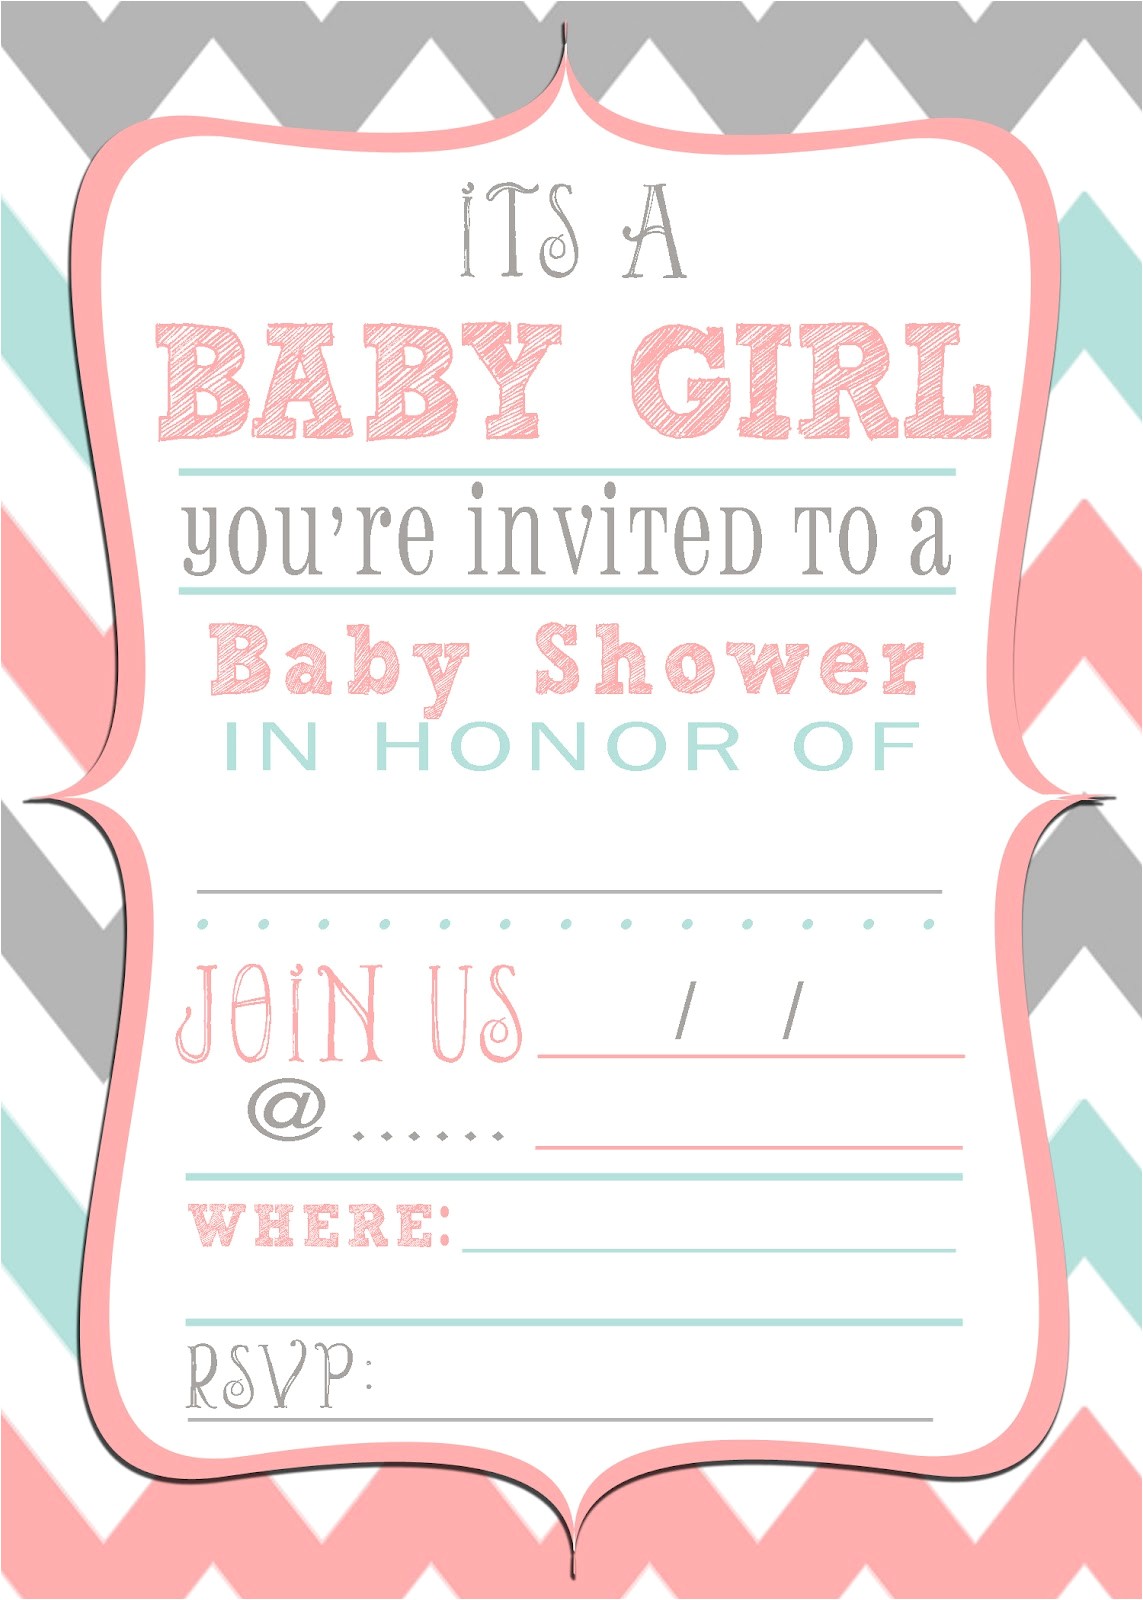 baby shower banner free downloads yipee